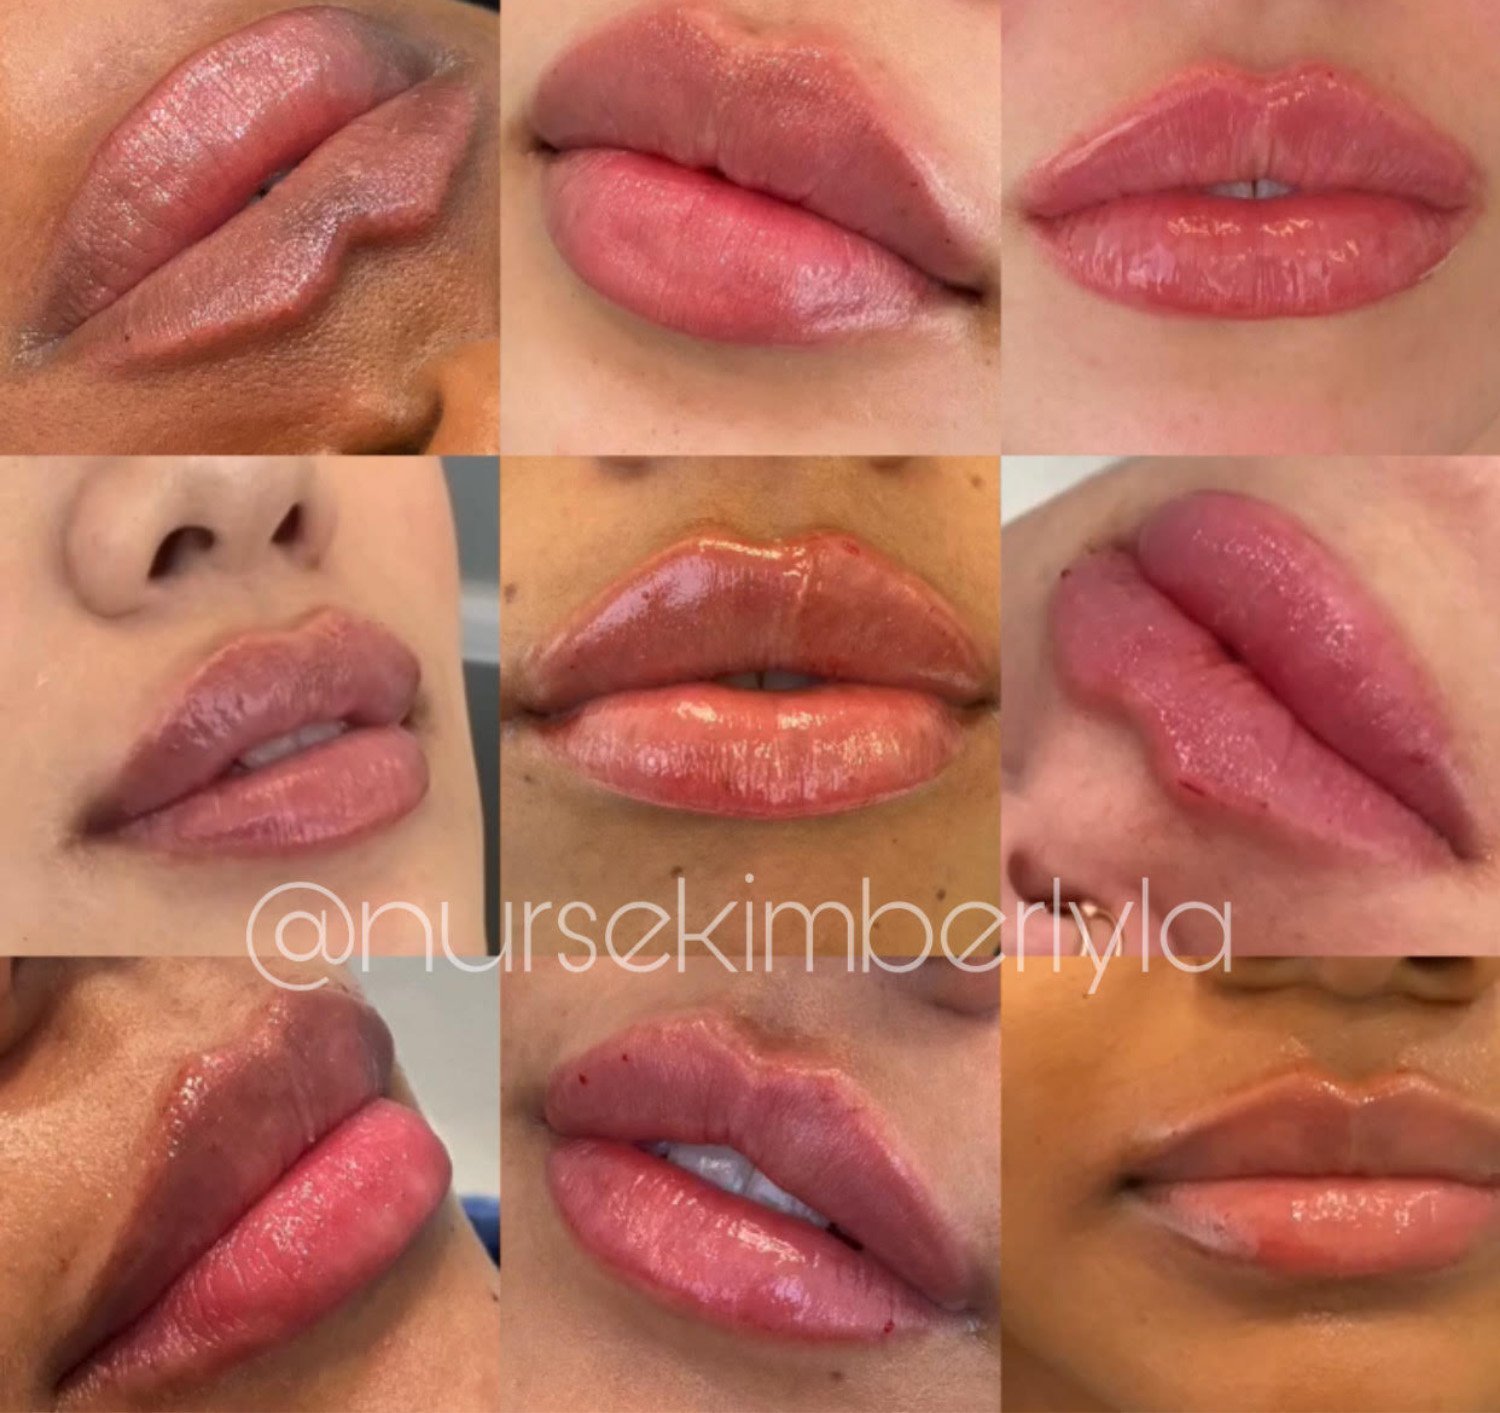 Kimberly cosmetic lip before and after.jpg